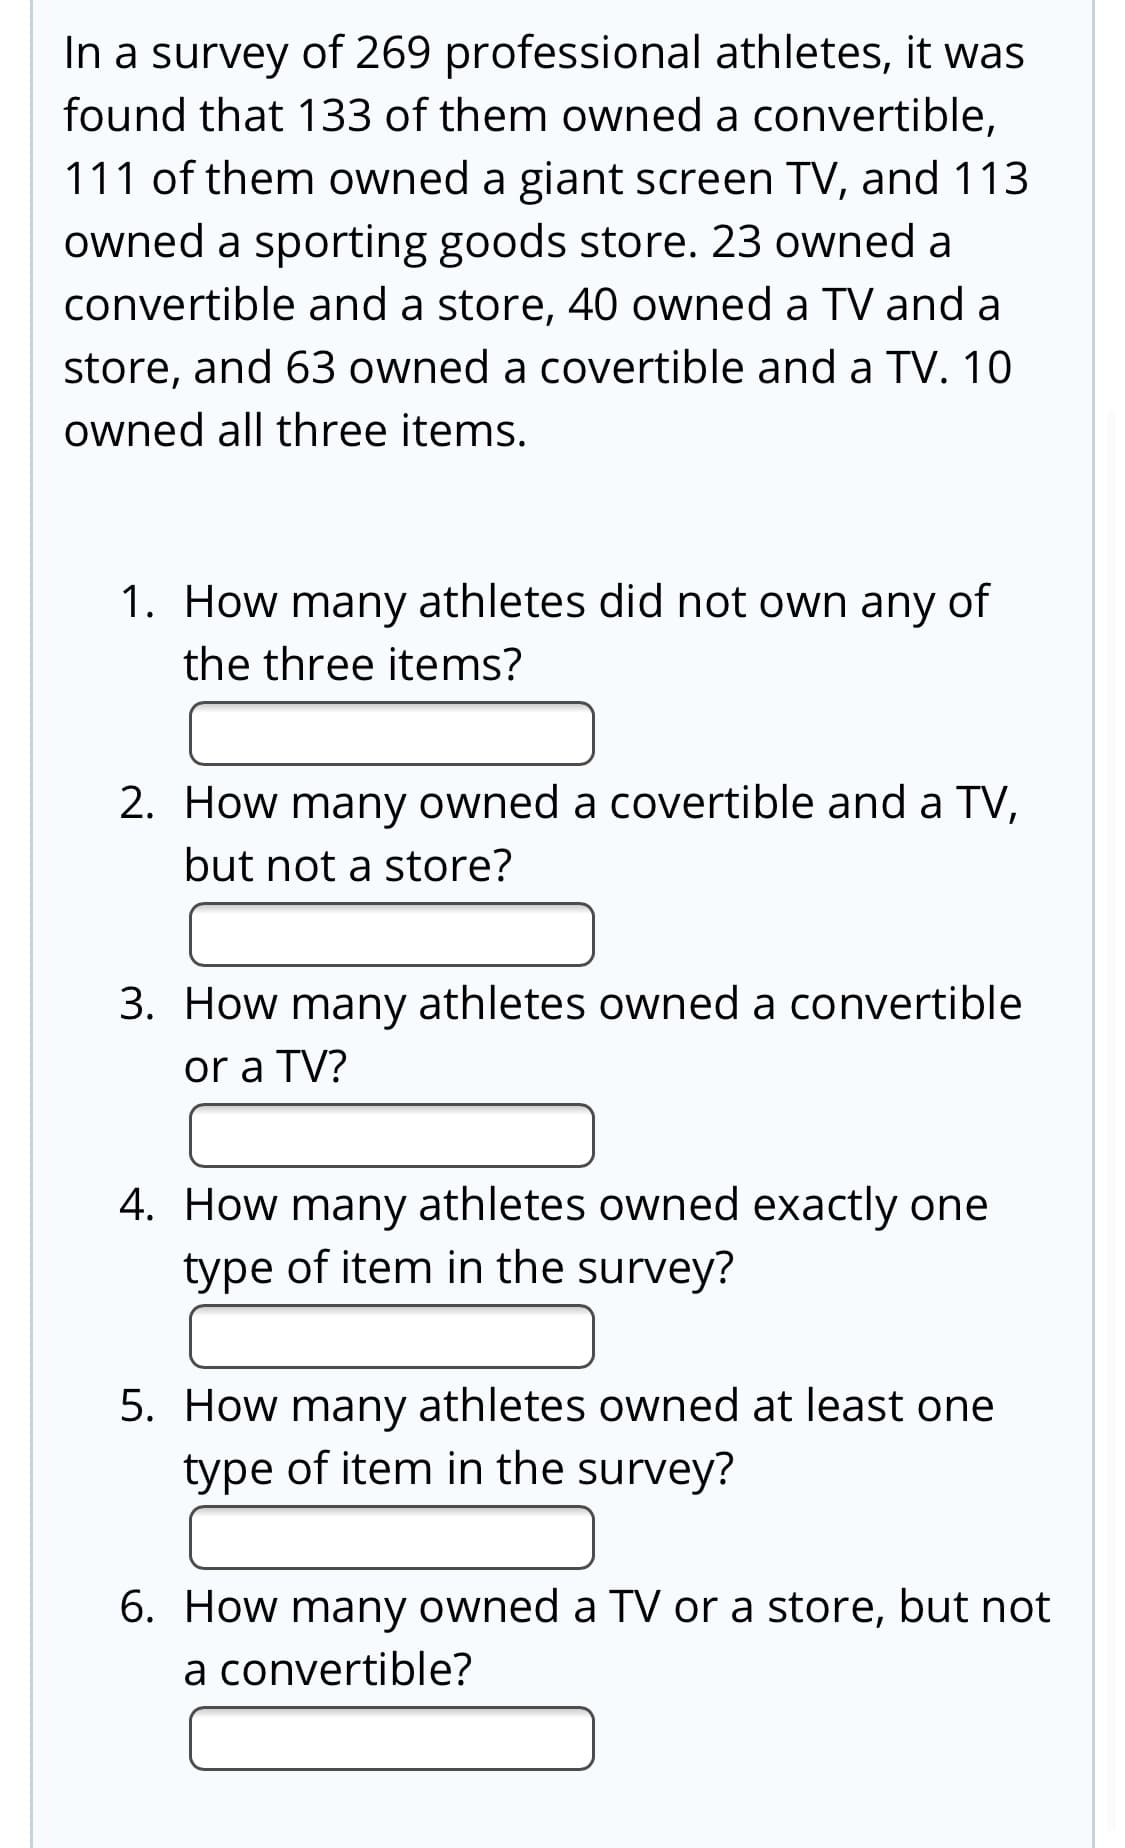 In a survey of 269 professional athletes, it was
found that 133 of them owned a convertible,
111 of them owned a giant screen TV, and 113
owned a sporting goods store. 23 owned a
convertible and a store, 40 owned a TV and a
store, and 63 owned a covertible and a TV. 10
owned all three items.
1. How many athletes did not own any of
the three items?
2. How many owned a covertible and a TV,
but not a store?
3. How many athletes owned a convertible
or a TV?
4. How many athletes owned exactly one
type of item in the survey?
5. How many athletes owned at least one
type of item in the survey?
6. How many owned a TV or a store, but not
a convertible?
